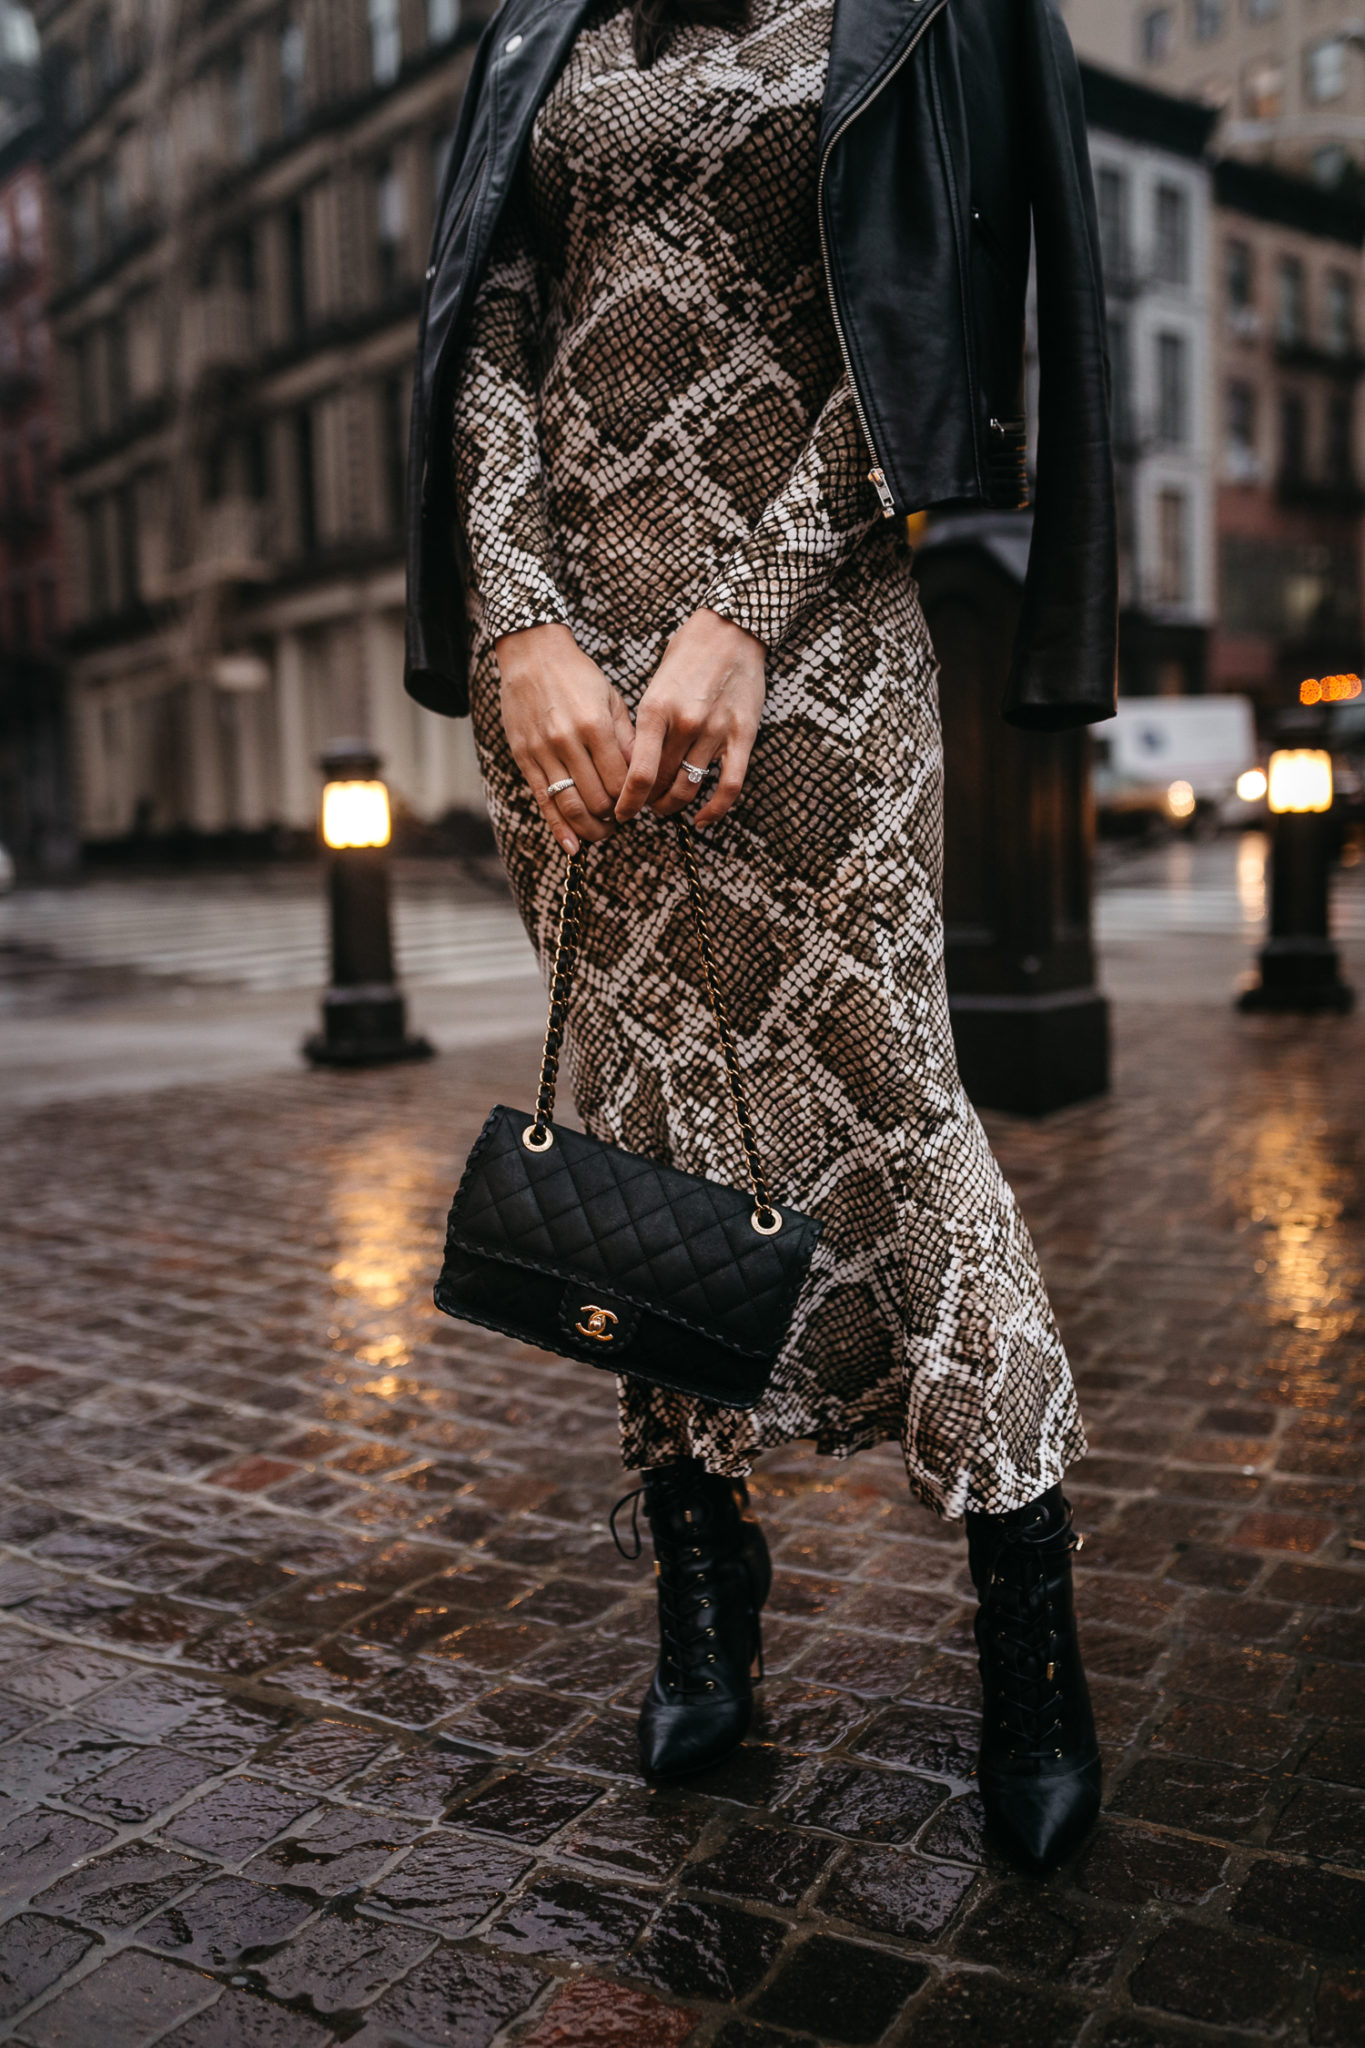 How to style snake prints